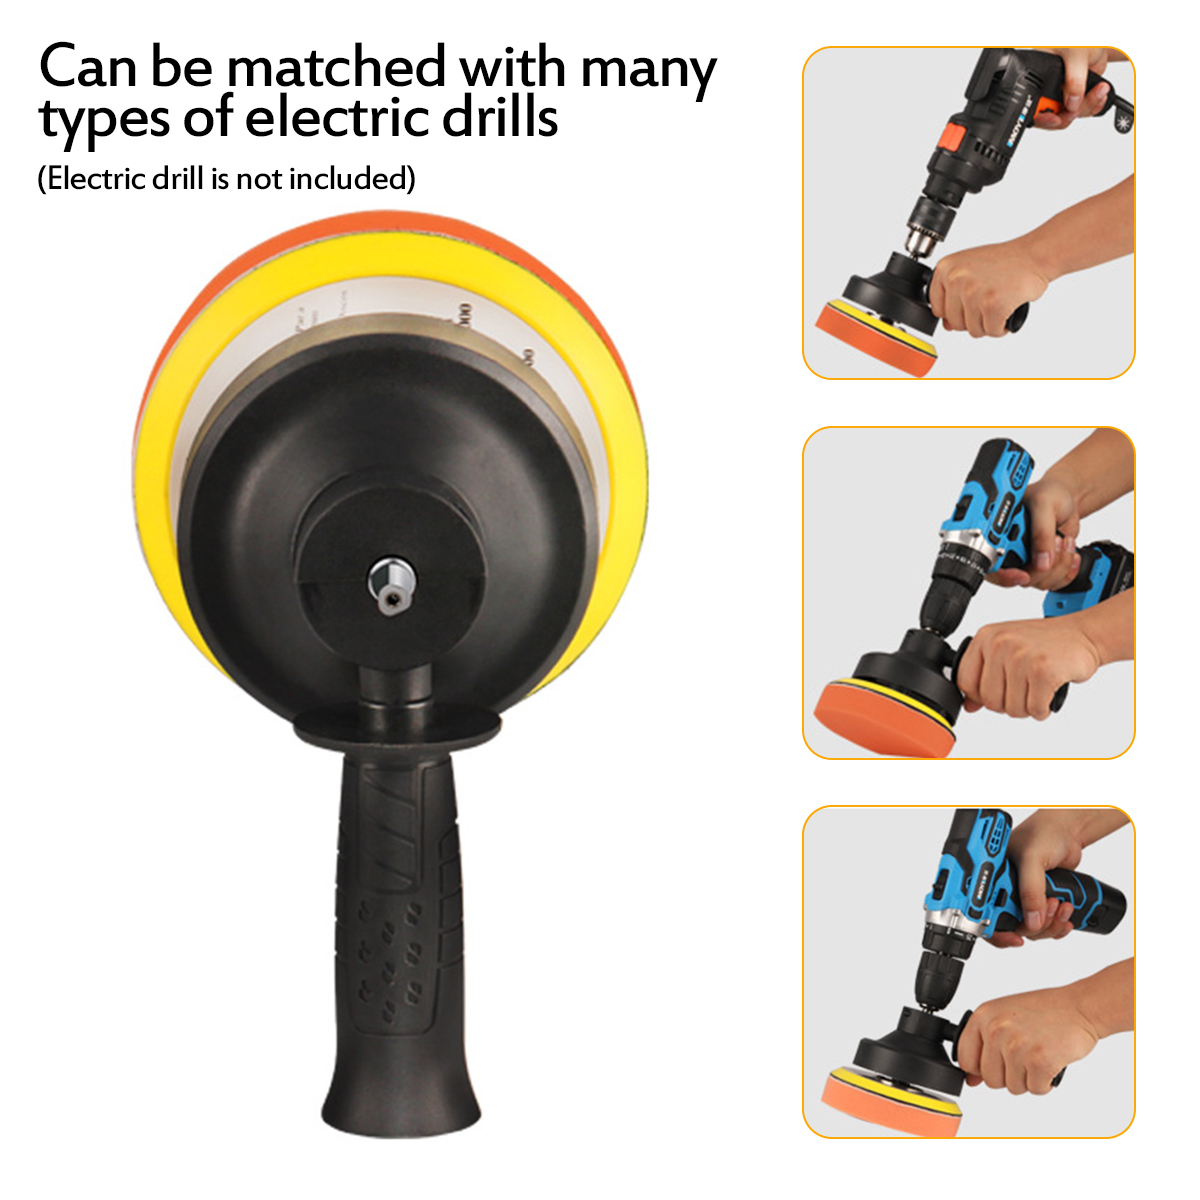 125mm-Electric-Polisher-Accessories-Set-Electric-Drill-to-Polish-Machine-Conversion-Head-For-Polishi-1918289-5